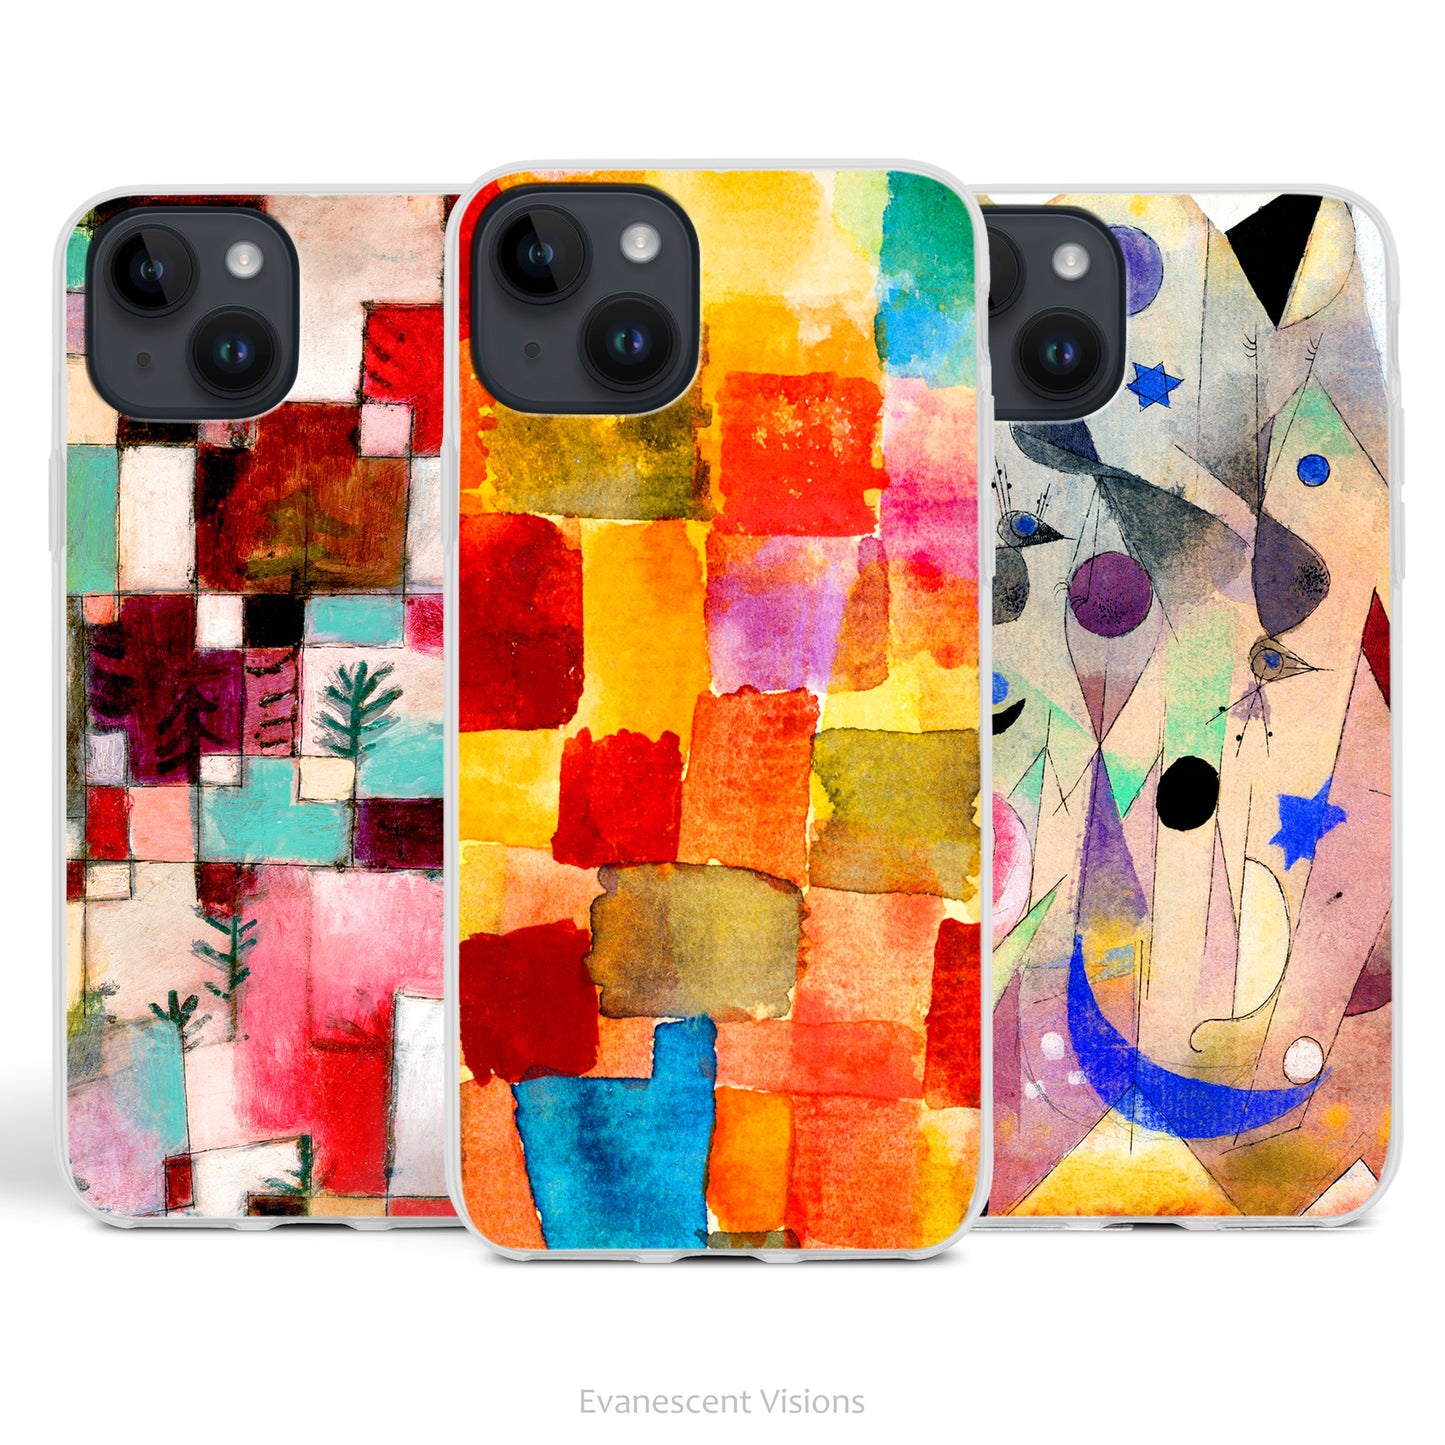 Paul Klee Colourful Abstract Art Phone Cases for iPhones 